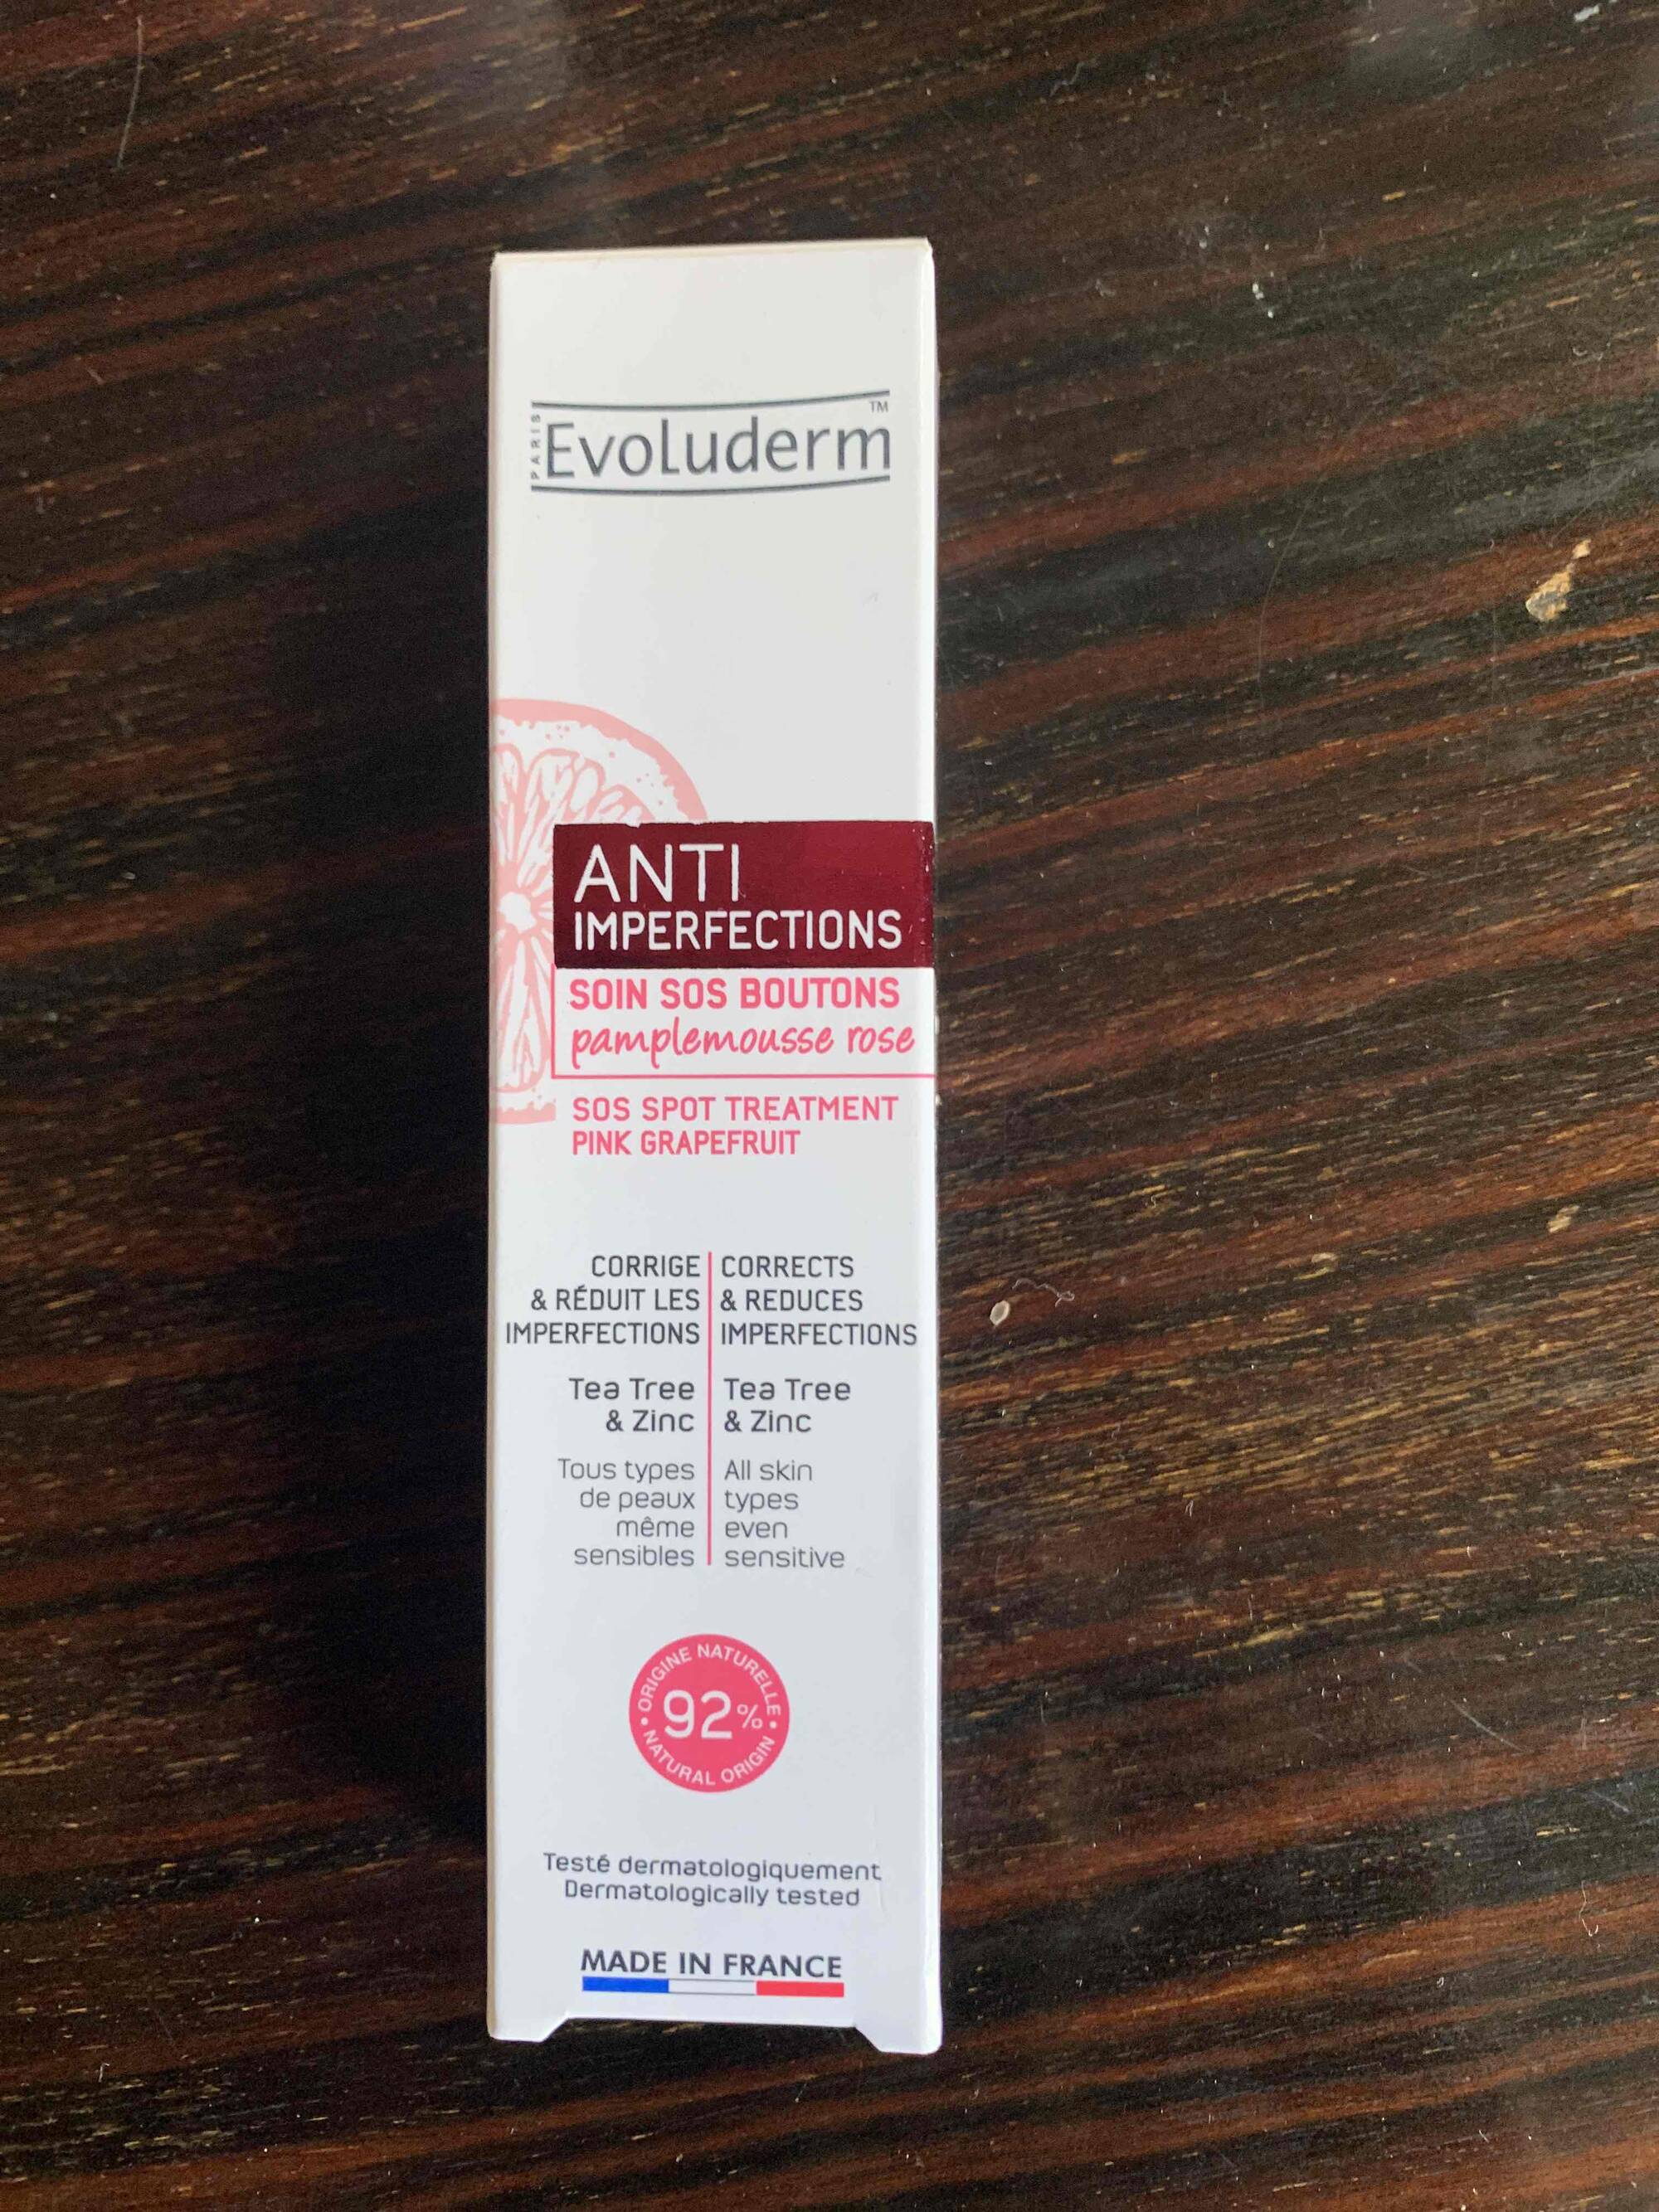 EVOLUDERM - Anti imperfections soin sos boutons